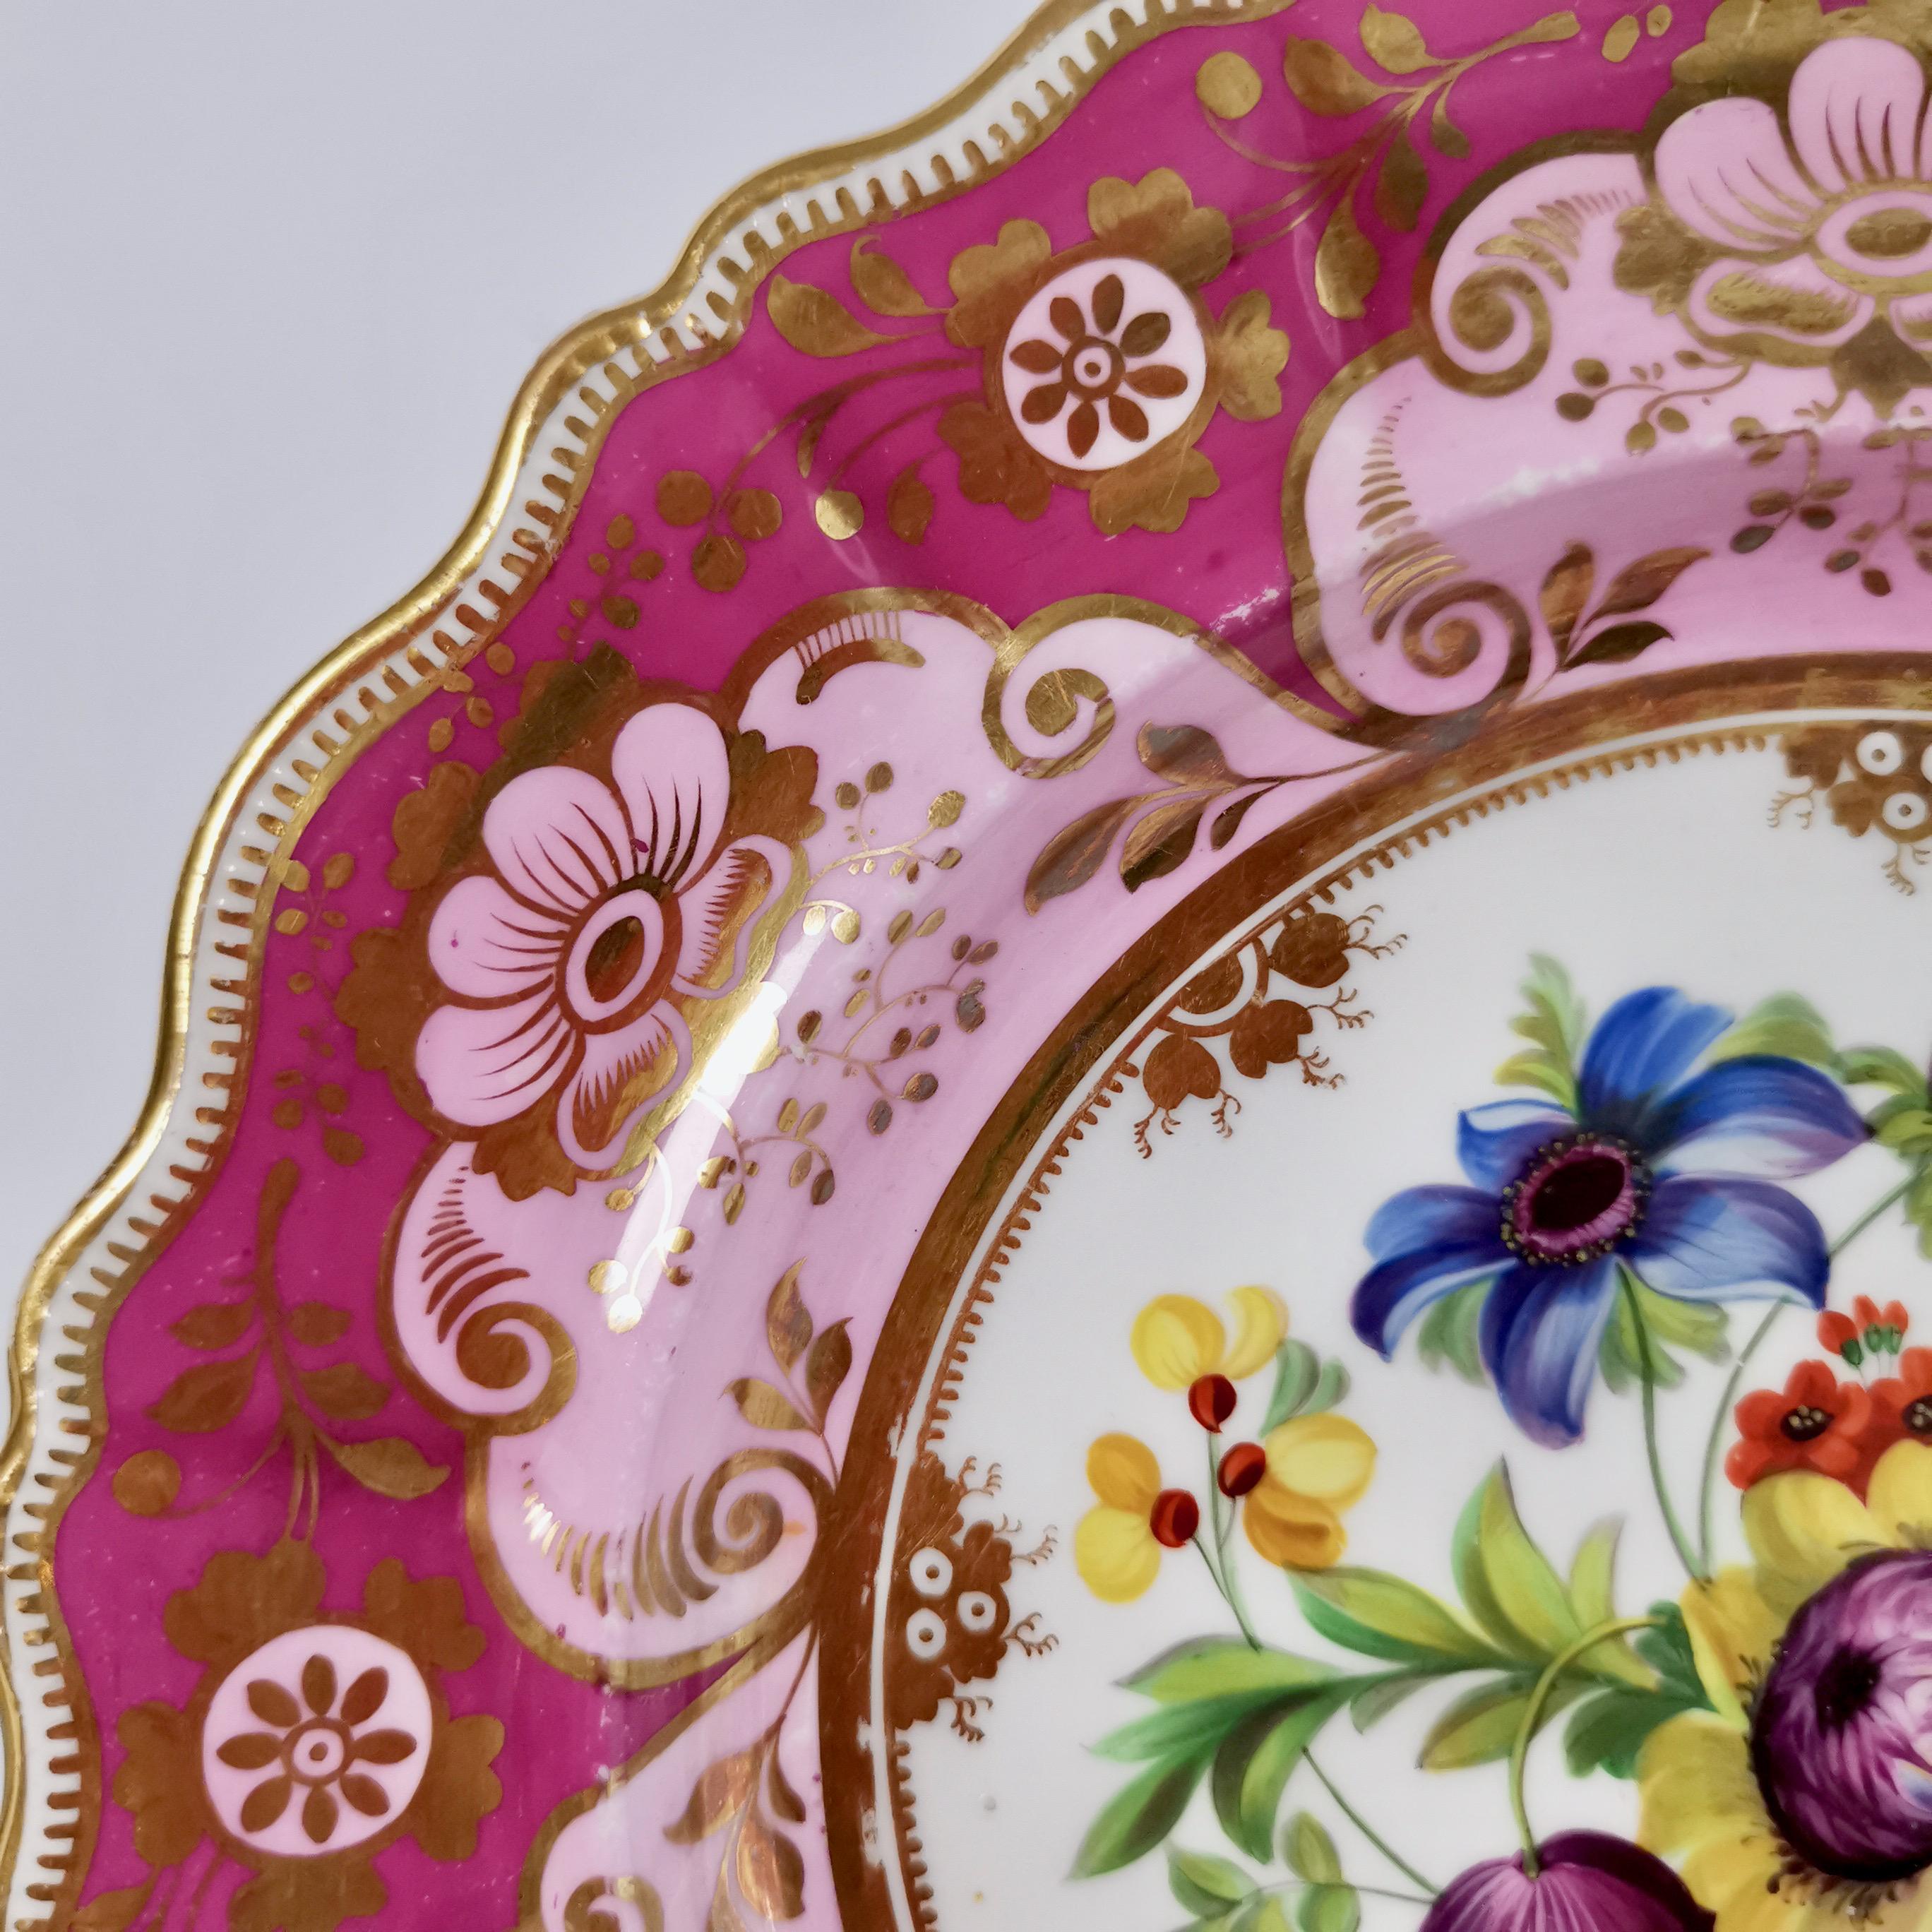 English Ridgway Porcelain Plate, Mauve, Pink and Flowers, Regency, ca 1829